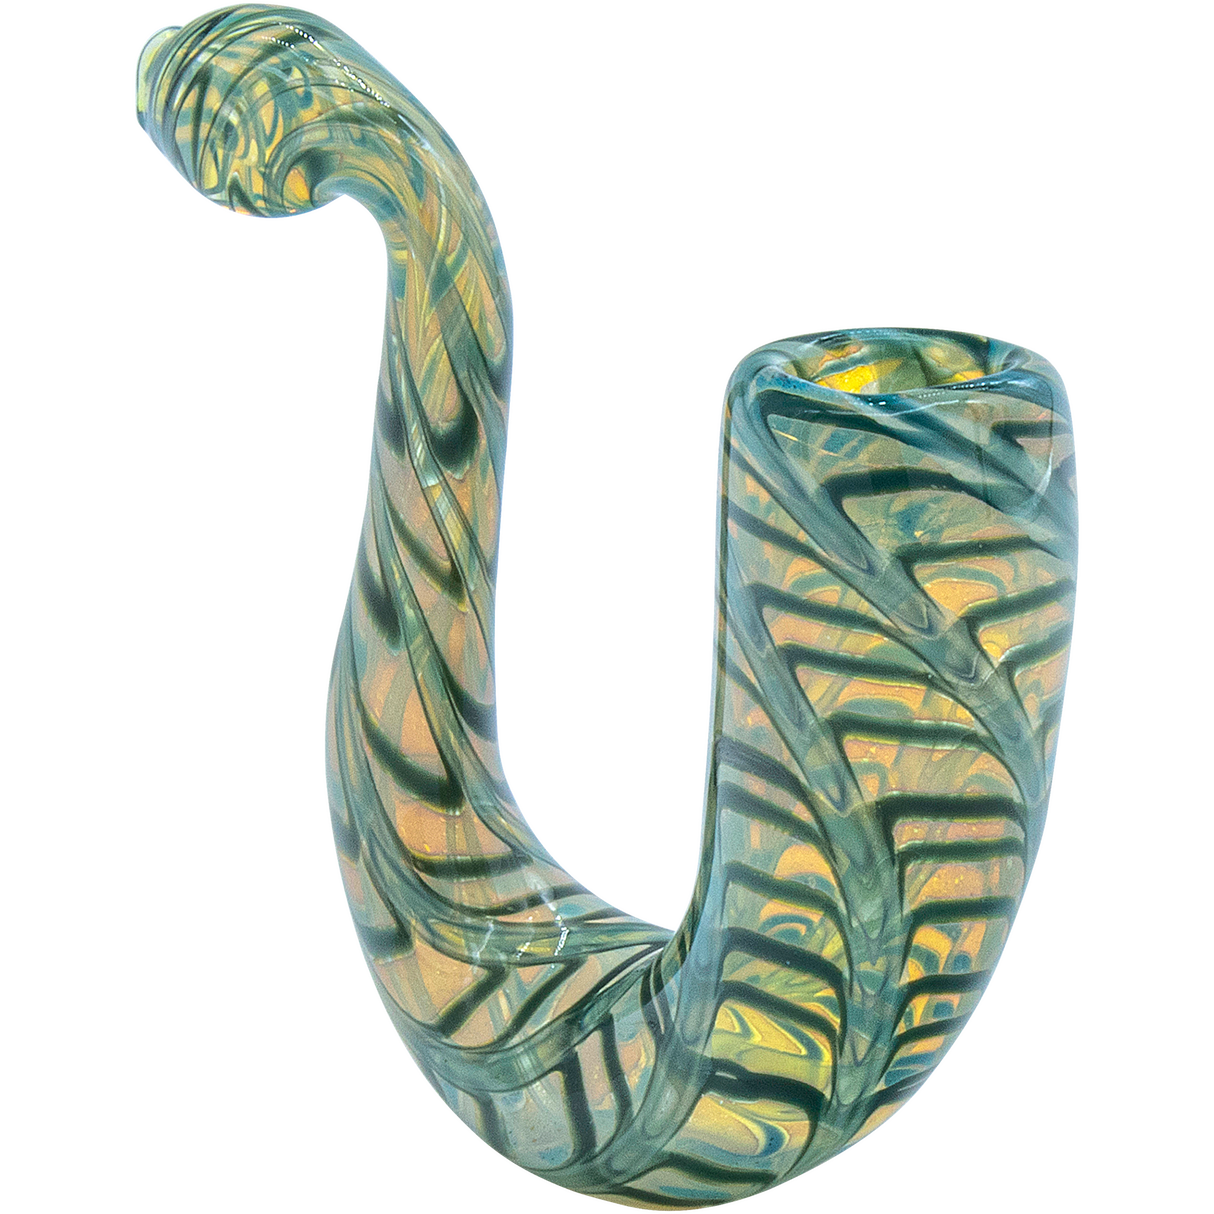 LA Pipes Pocket Sherlock Pipe in Aqua with Color Changing Fumed Glass, Front View